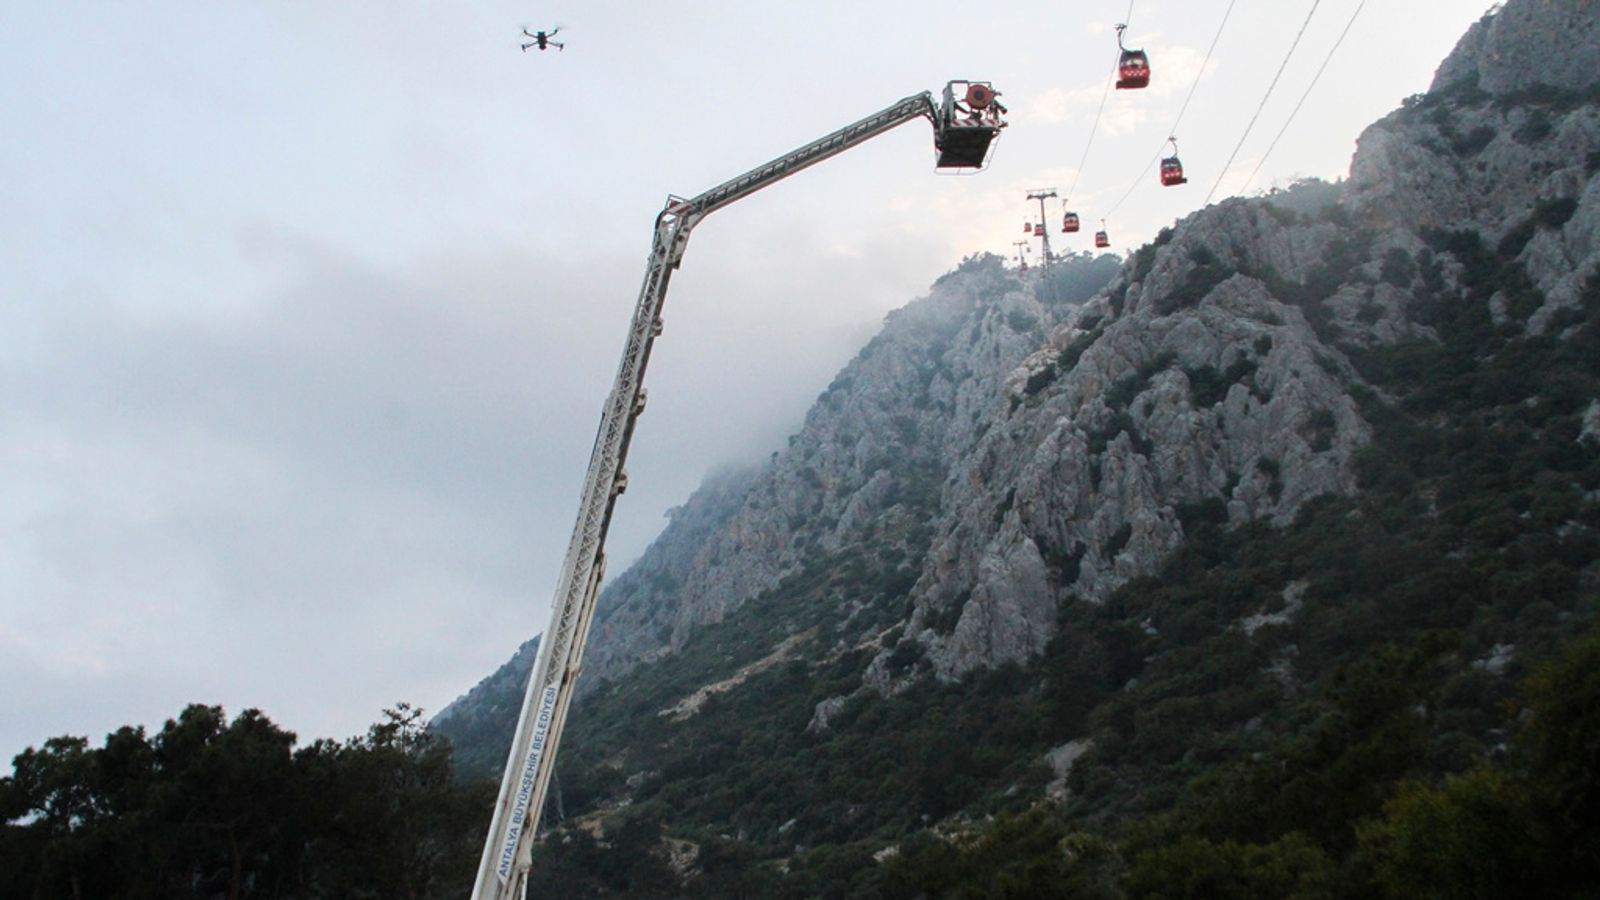 Fatal cable car crash in Turkey leaves 1 dead and 10 injured